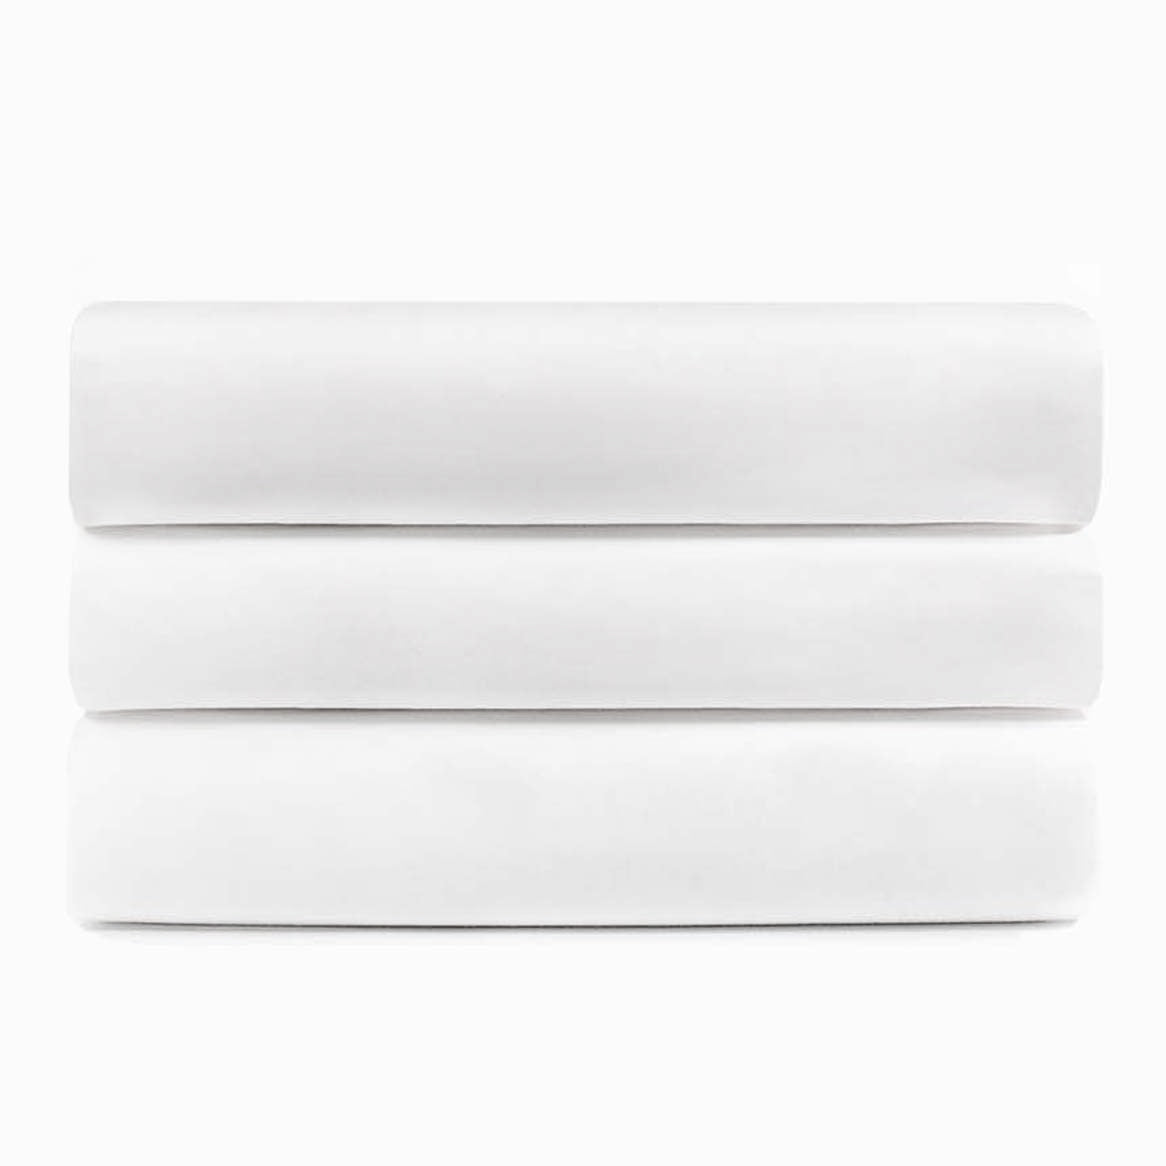 Cotton Rich Percale Hotel Quality Fitted Bed Sheets, Set of 3, 6, 12 - White